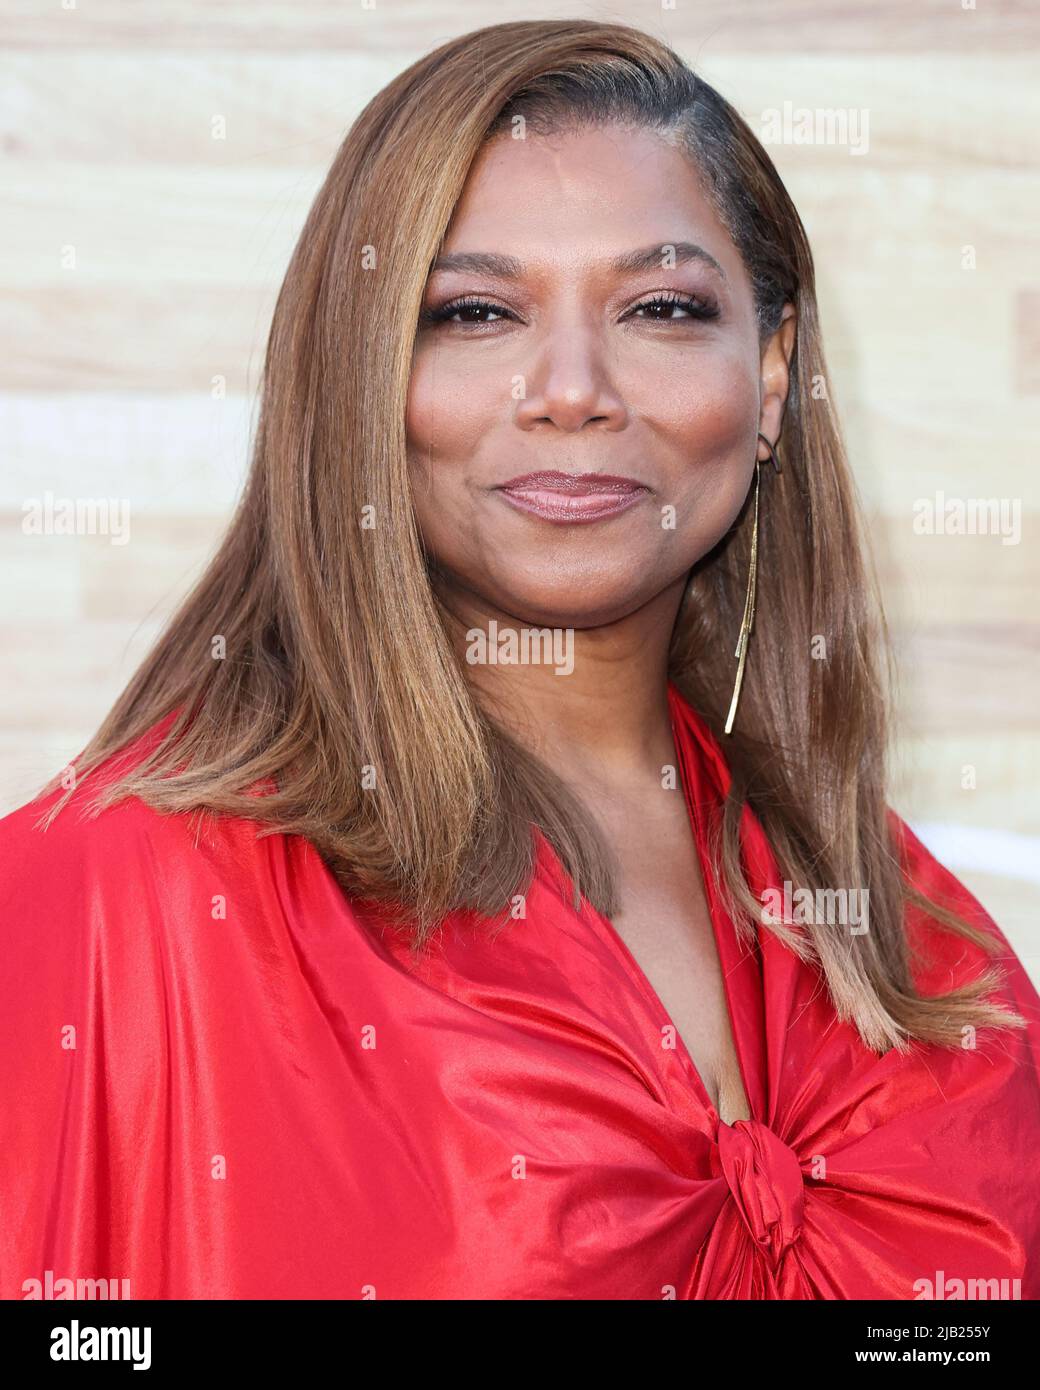 WESTWOOD, LOS ANGELES, CALIFORNIA, USA - JUNE 01: American rapper/actress Queen Latifah arrives at the Los Angeles Premiere Of Netflix's 'Hustle' held at the Regency Village Theatre on June 1, 2022 in Westwood, Los Angeles, California, United States. (Photo by Xavier Collin/Image Press Agency) Stock Photo